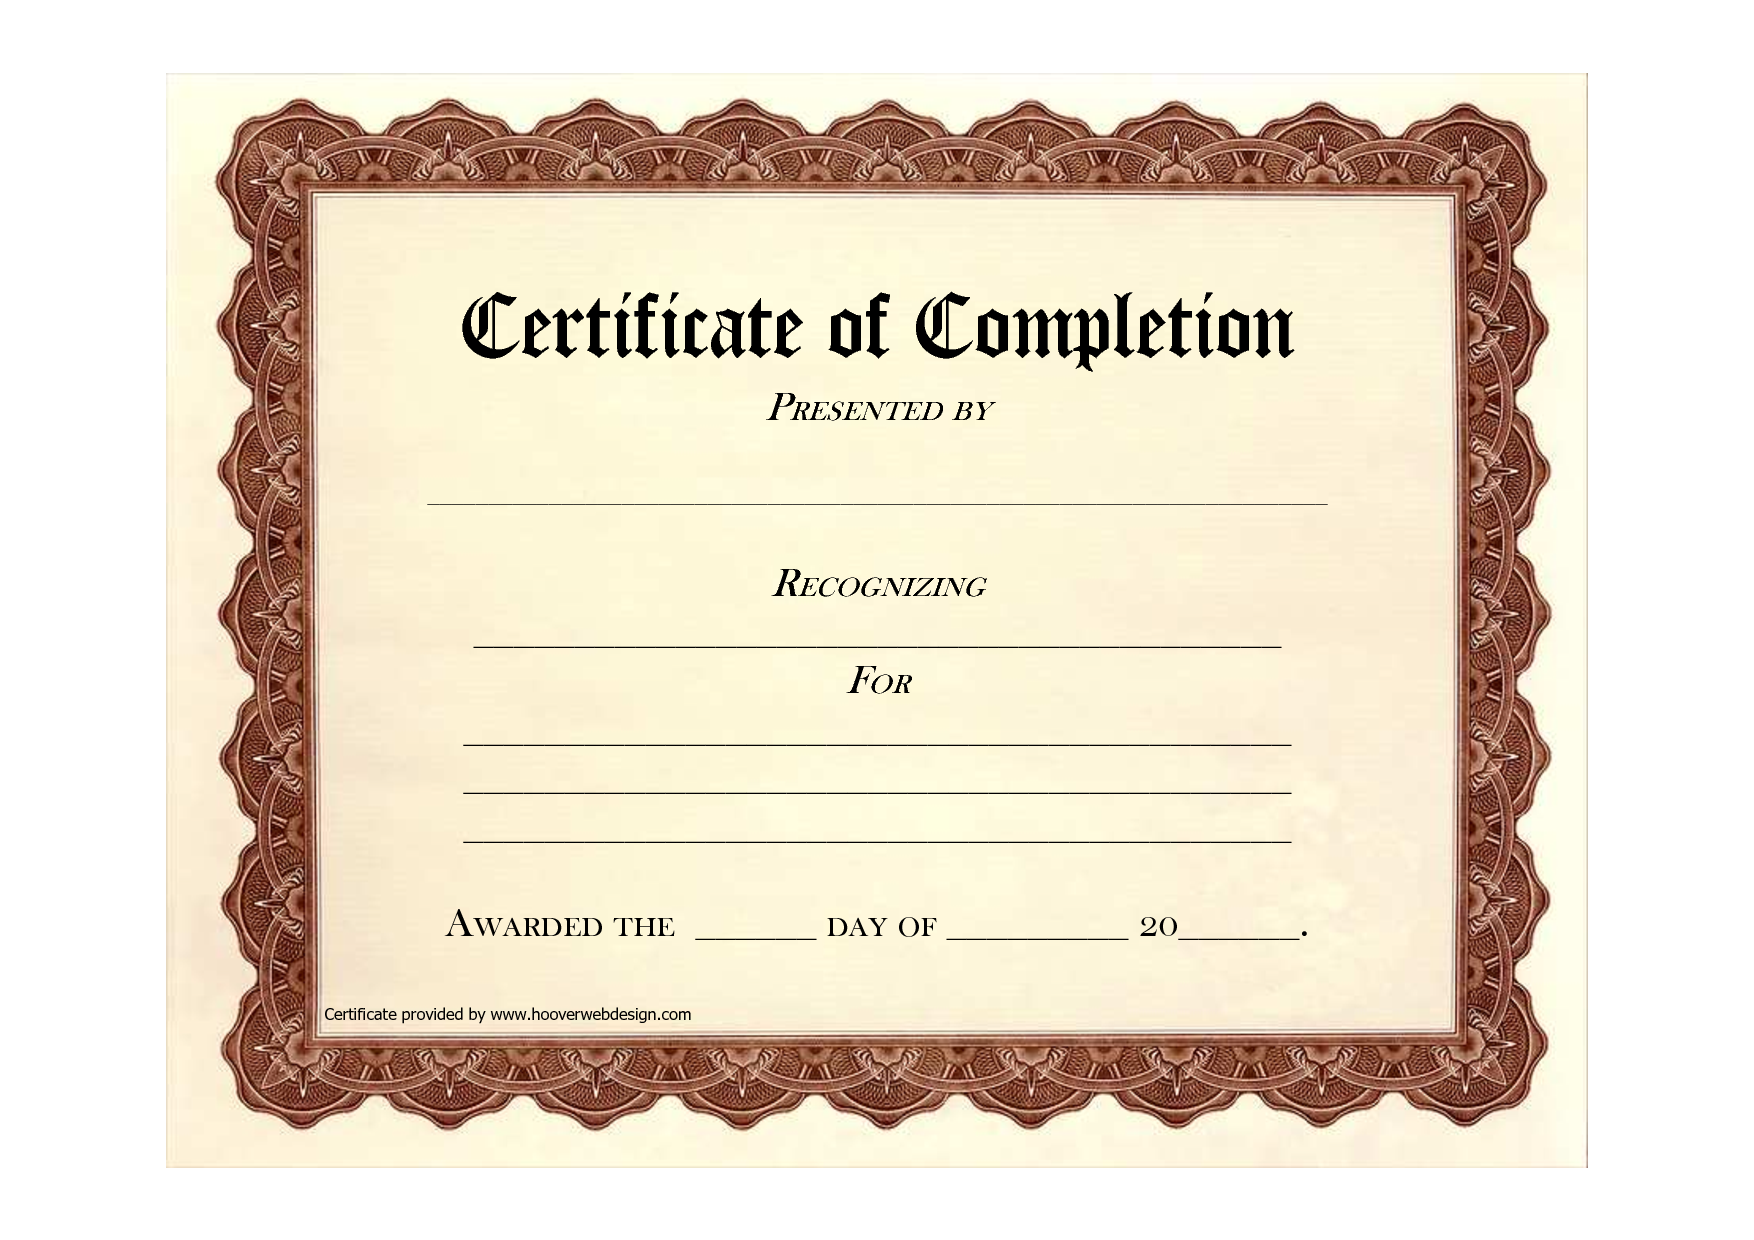 10-certificate-of-completion-templates-free-download-images-free-word-certificate-completion